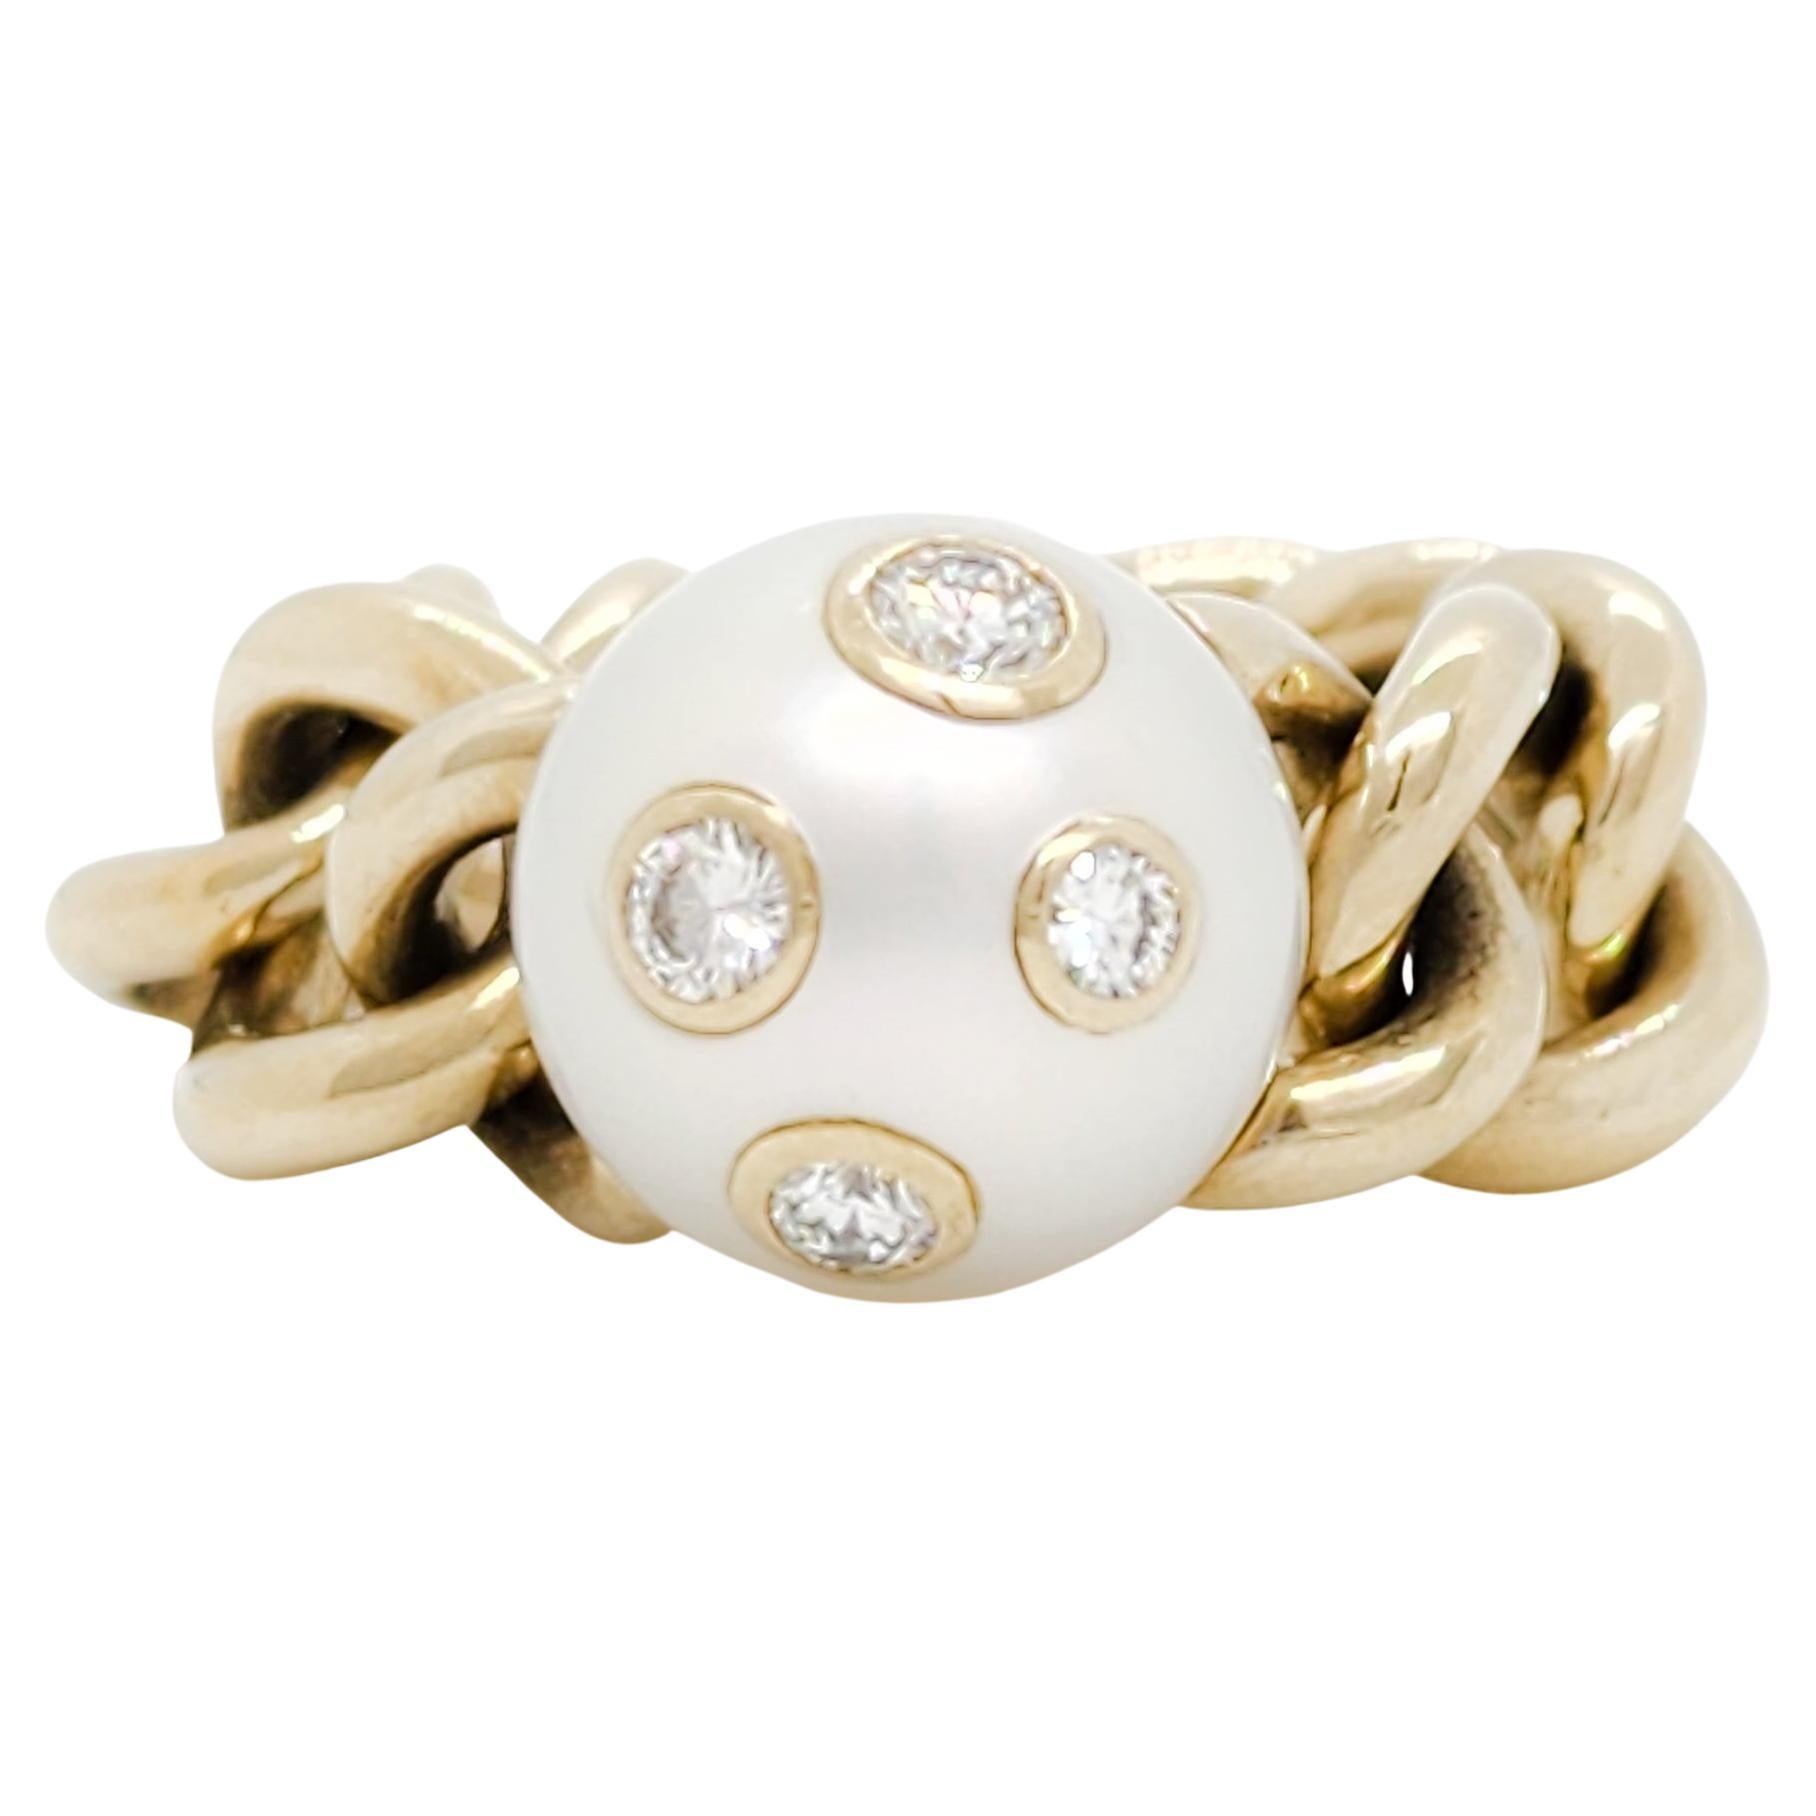 Mikimoto Estate White Pearl and Diamond Chain Link Ring in 18k Yellow Gold